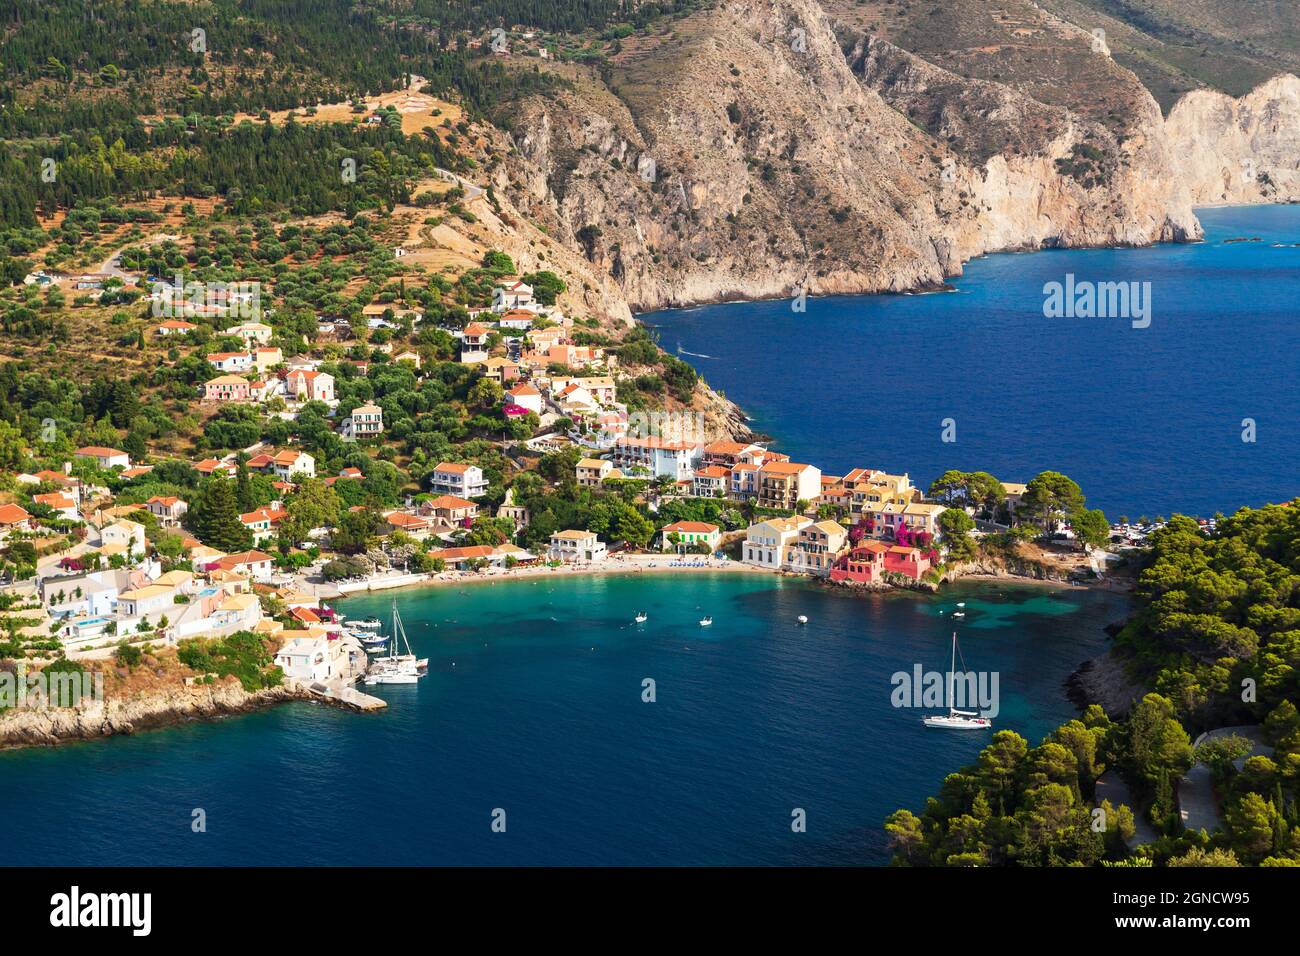 Top view at Asos village, Assos peninsula and fantastic blue Ionian Sea water. Aerial view, summer scenery of famous and extremely popular travel dest Stock Photo